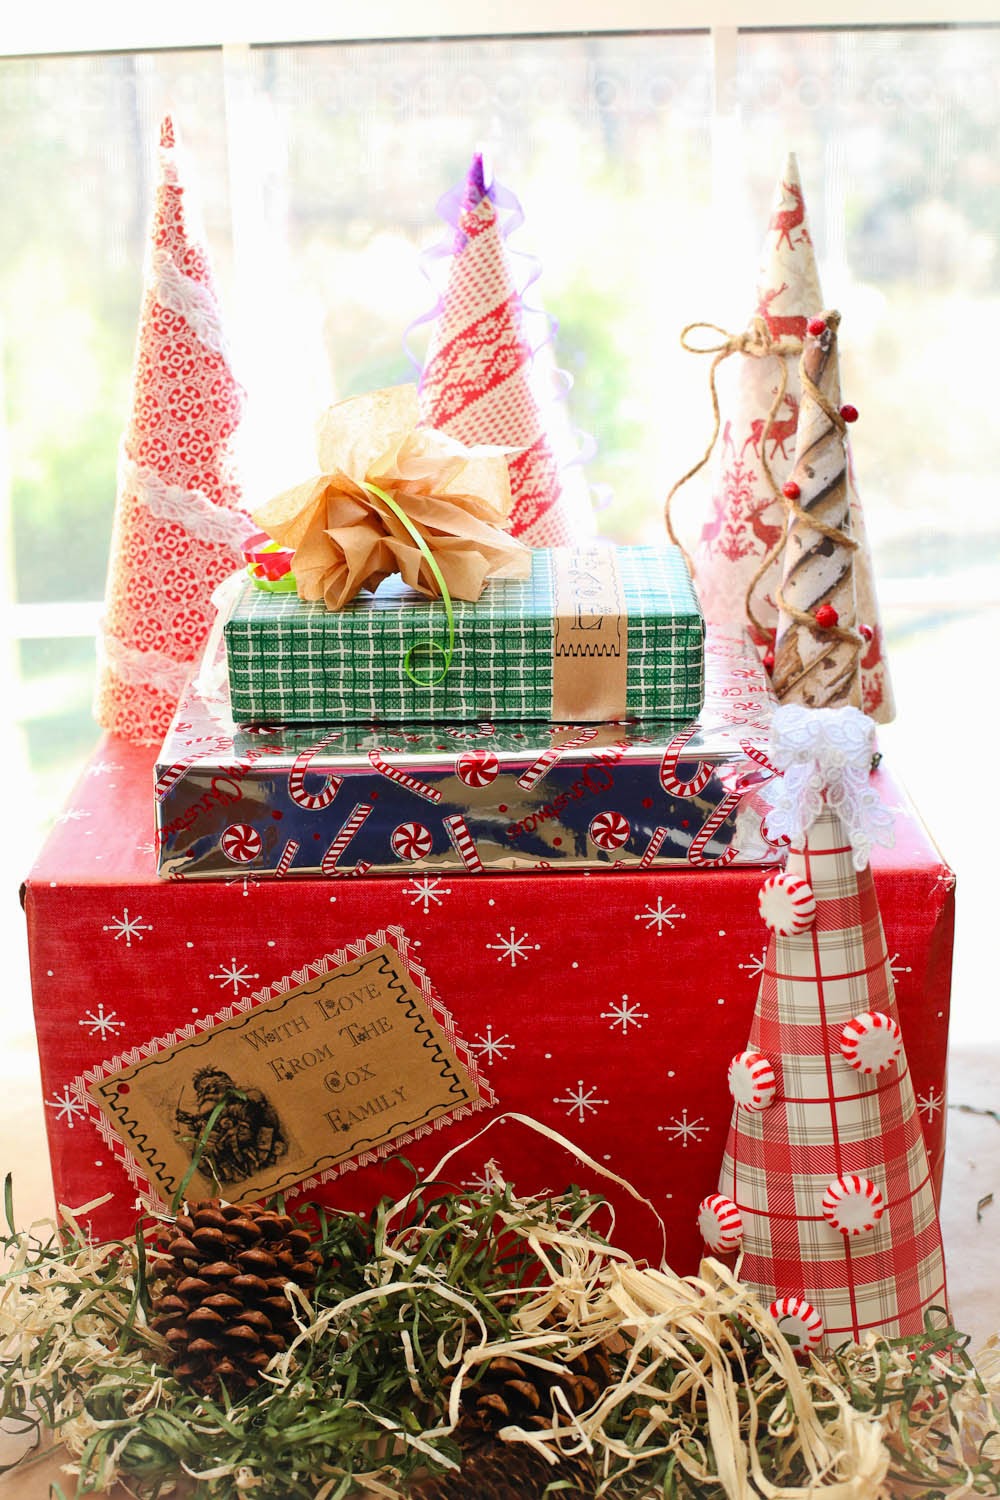 EASY CHRISTMAS PAPER CRAFTS! | Loom Knitting by This Moment is Good!